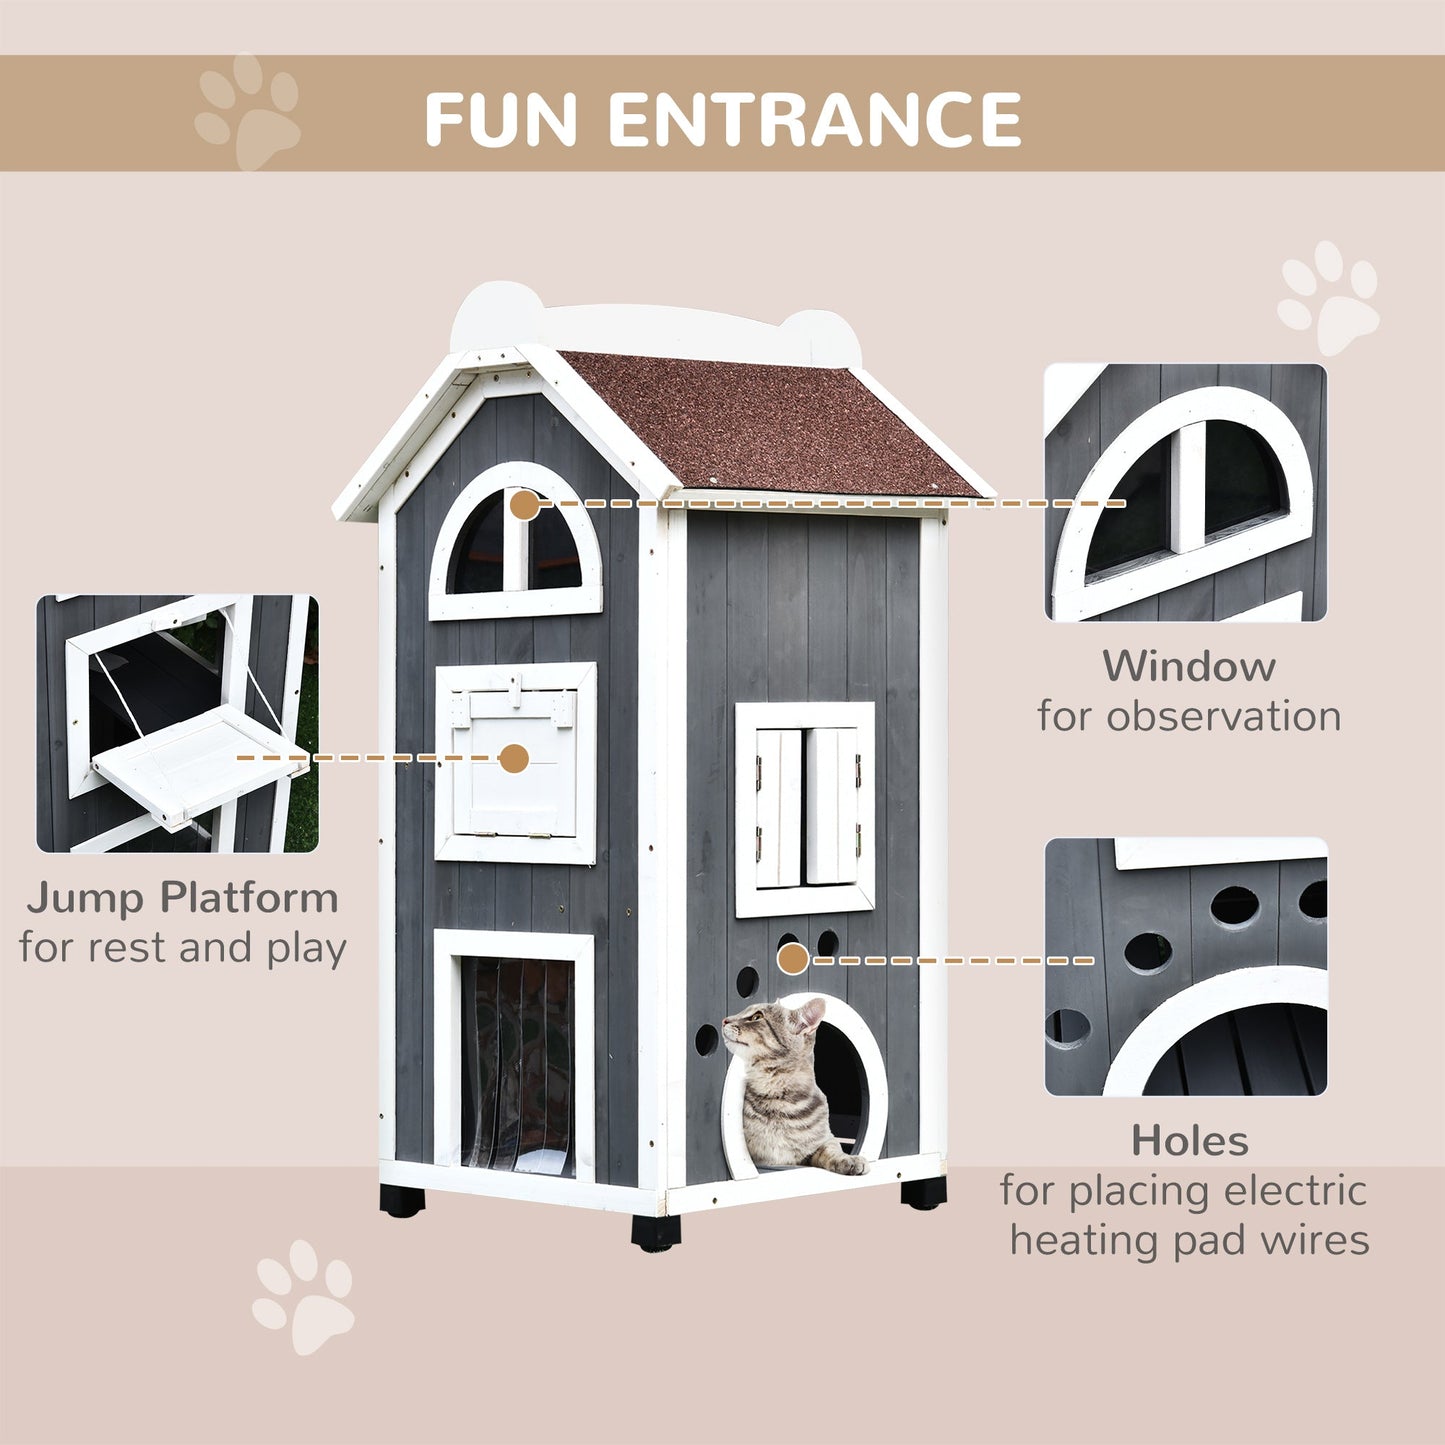 -PawHut 43"H Wooden Cat House Feral Cat Shelter Outdoor Kitten Condo 3-Floor Pet Habitat with Asphalt Roof, Escape Doors, Inside Stairs, Grey and White - Outdoor Style Company